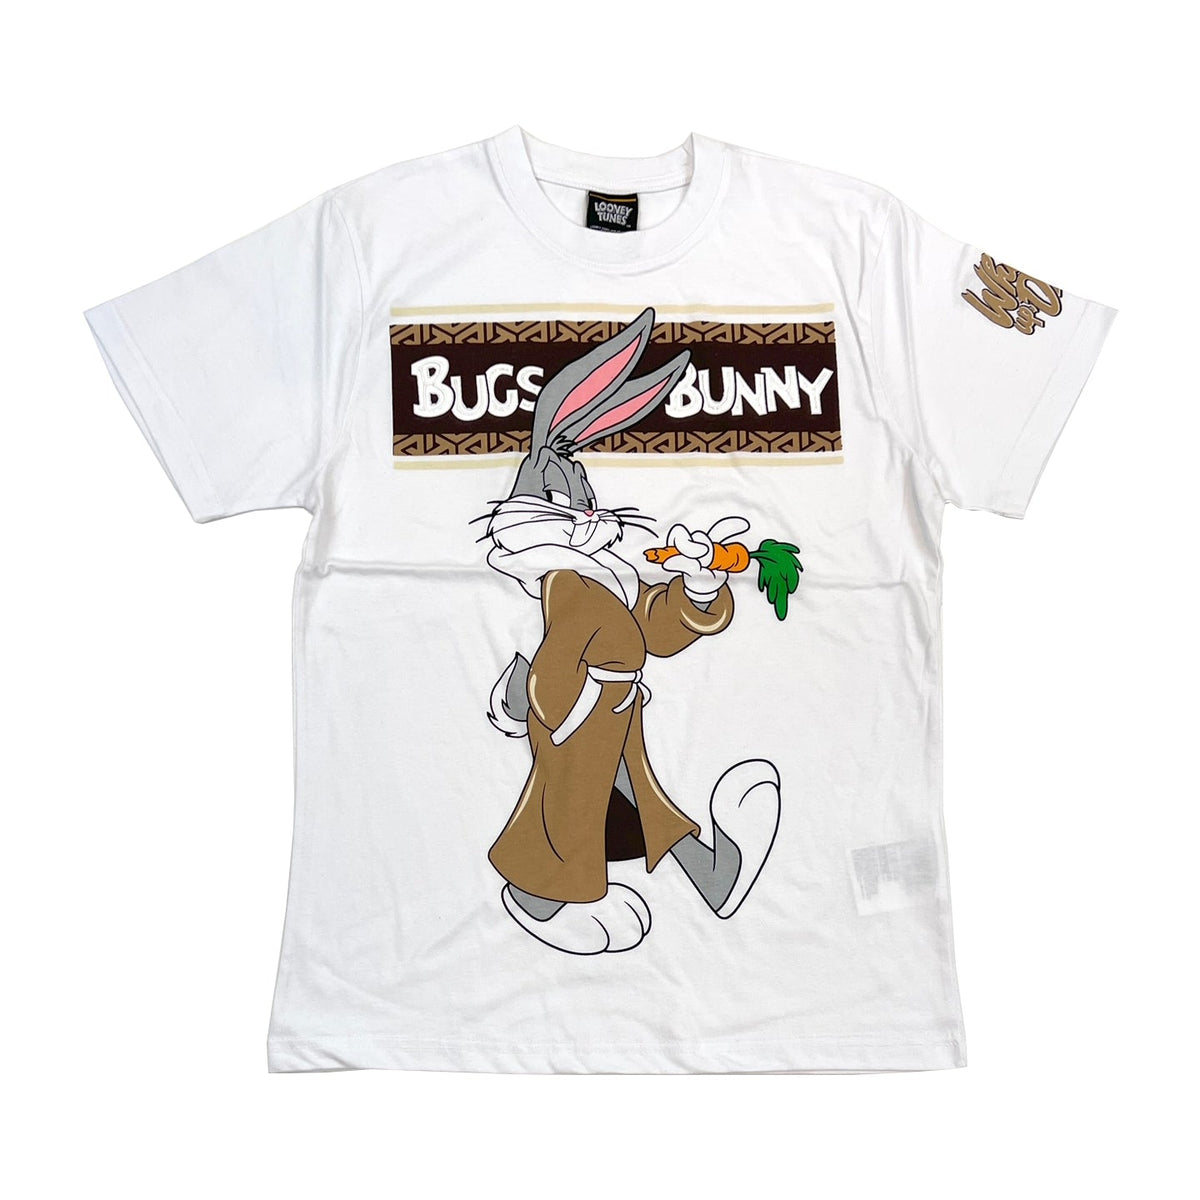 $30 (White) Bunny Tee Looney 2 $16.99 Tunes Bugs / for